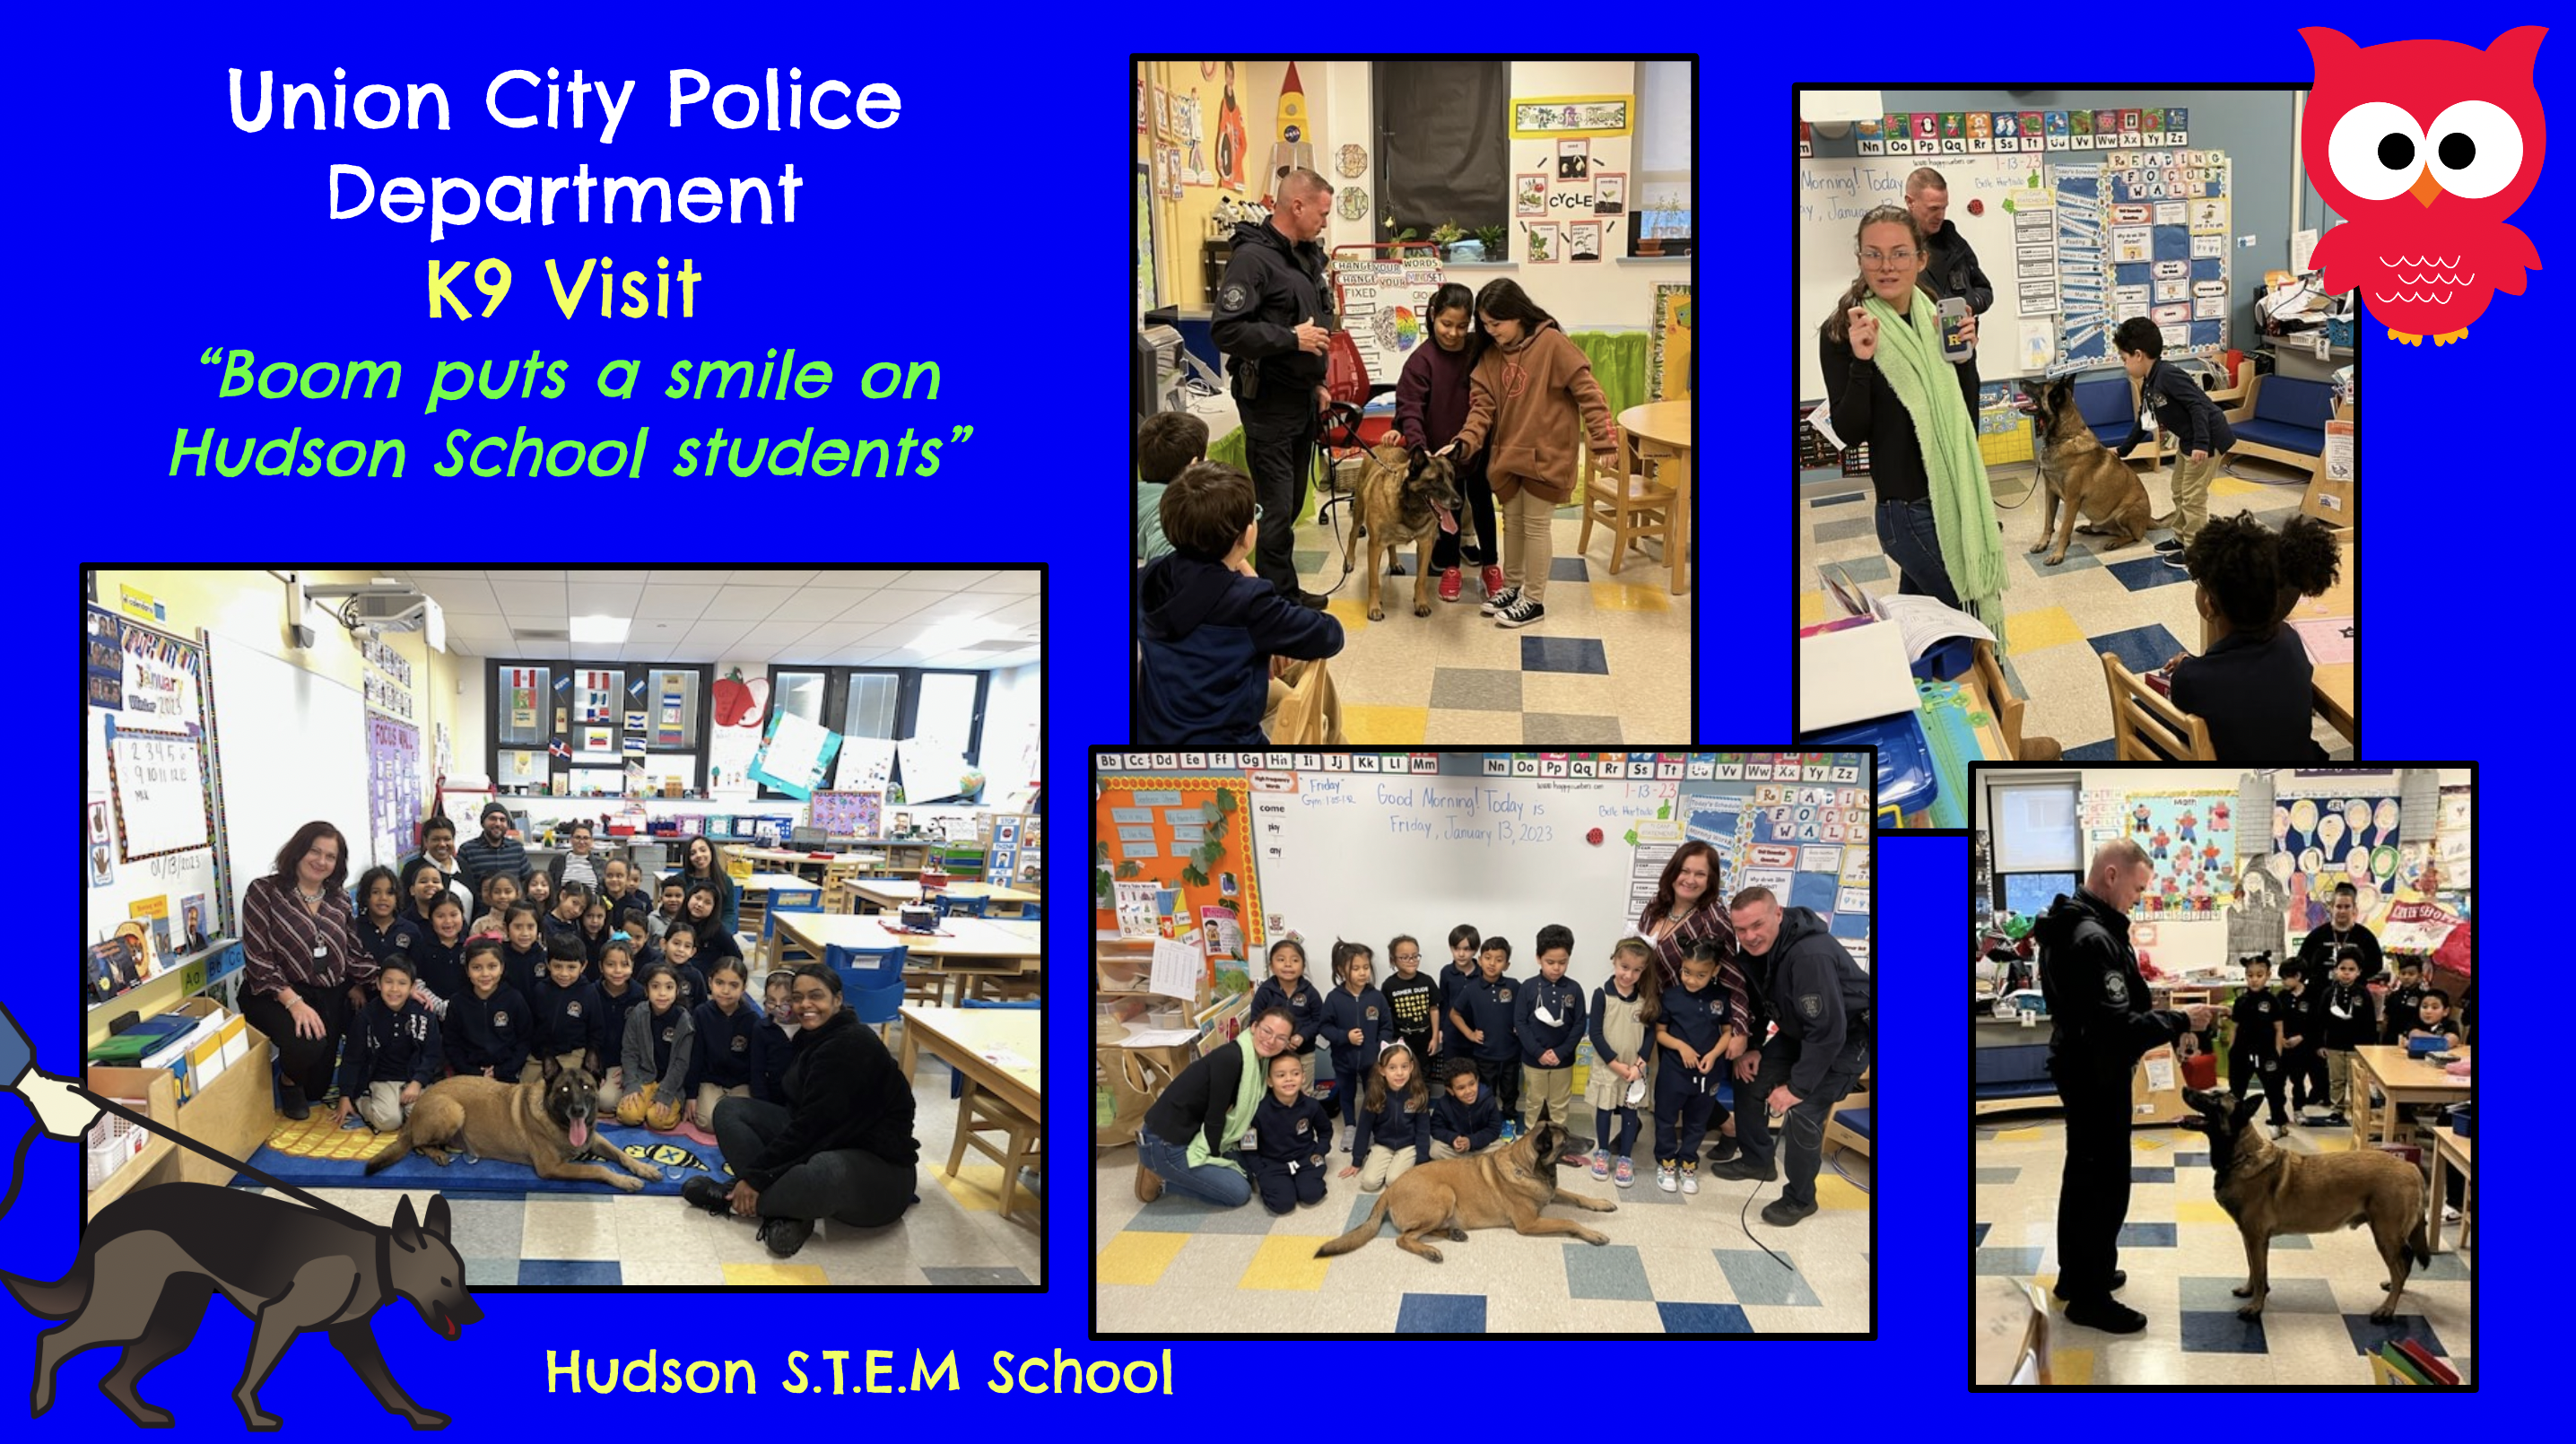 The Union City Police Department K-9 Unit visiting the Hudson School